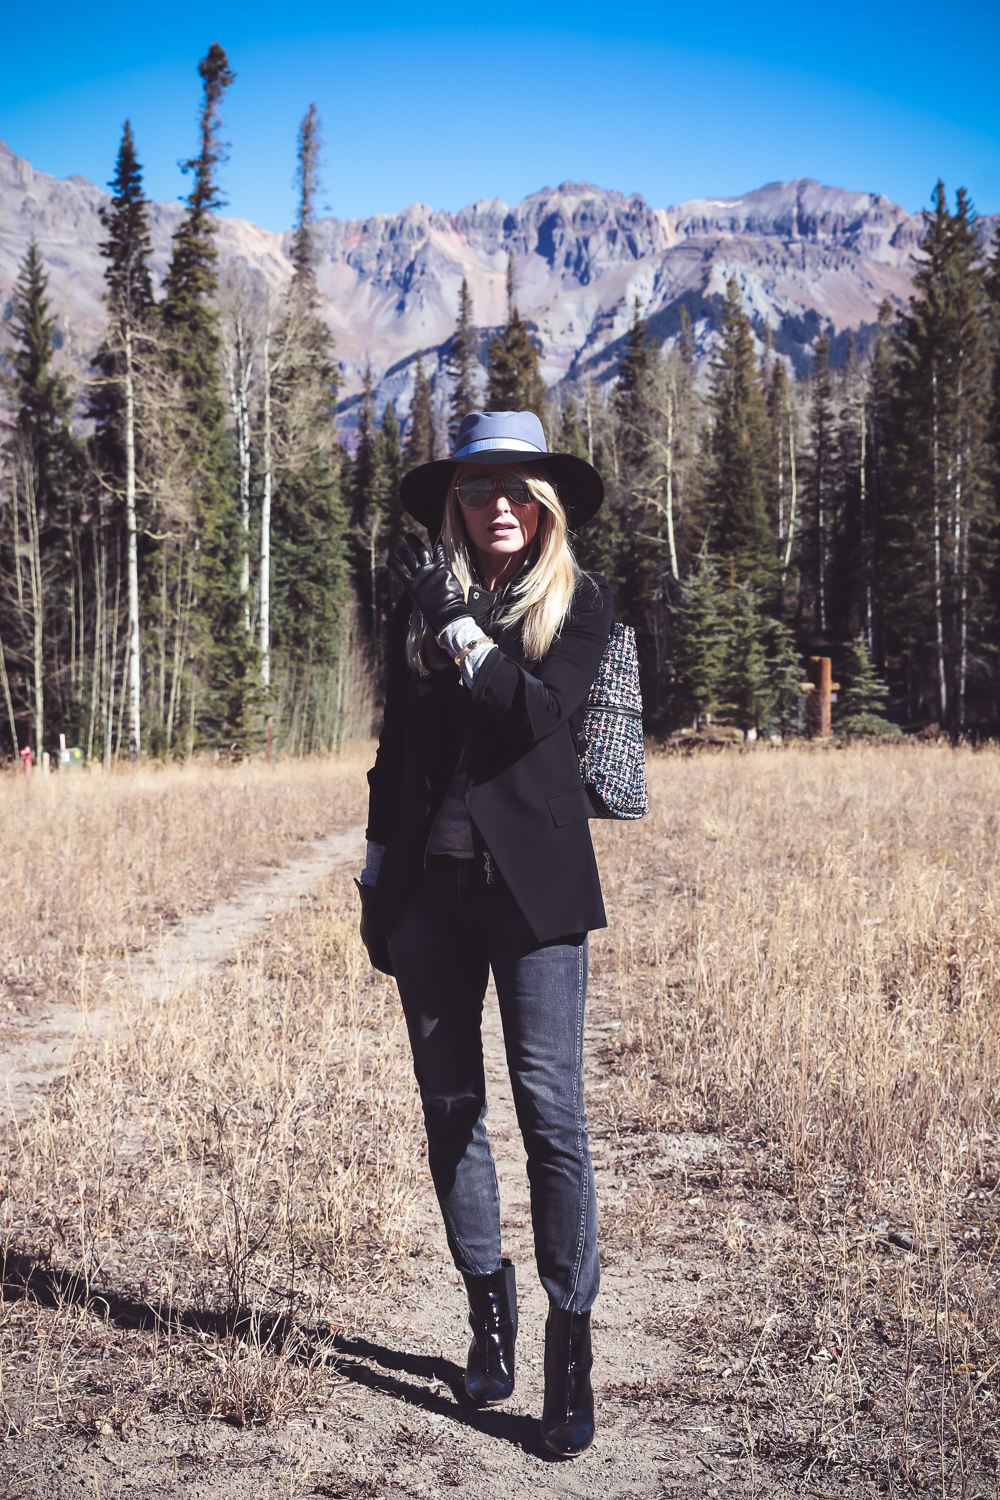 Styling Hats for women for fall and winter, featuring a Henri Bendel felt hat, paired with a jetsetter tweed backpack, veronica beard blazer with leather dickey and amo twist jeans with vince camuto patent booties on fashion blogger over 4o from Busbee Style Erin Busbee